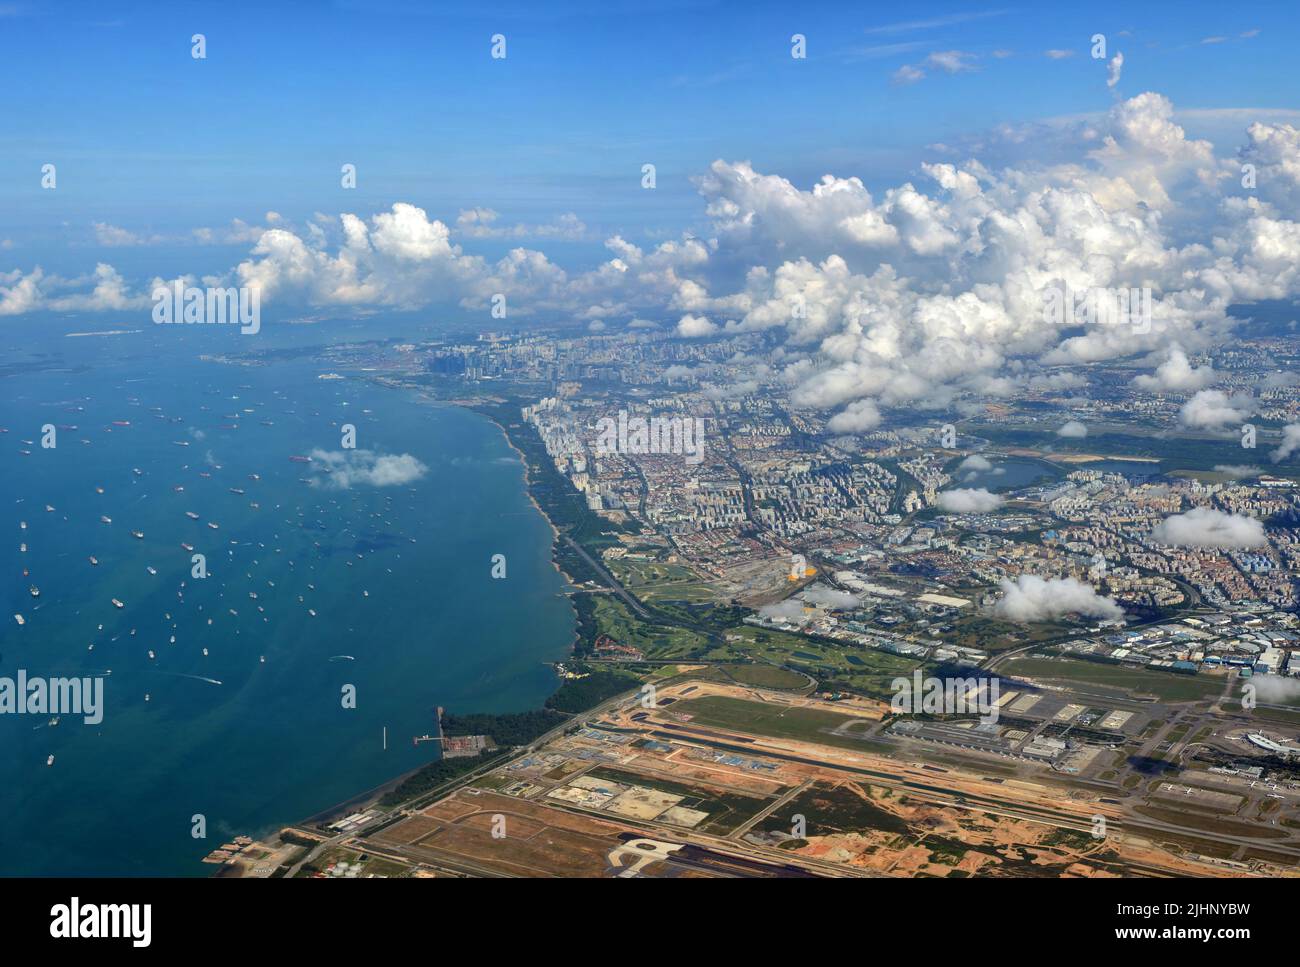 Coming in to land at Changi Aiport, Singapore with the runway in the foreground and the port in the background. Stock Photo